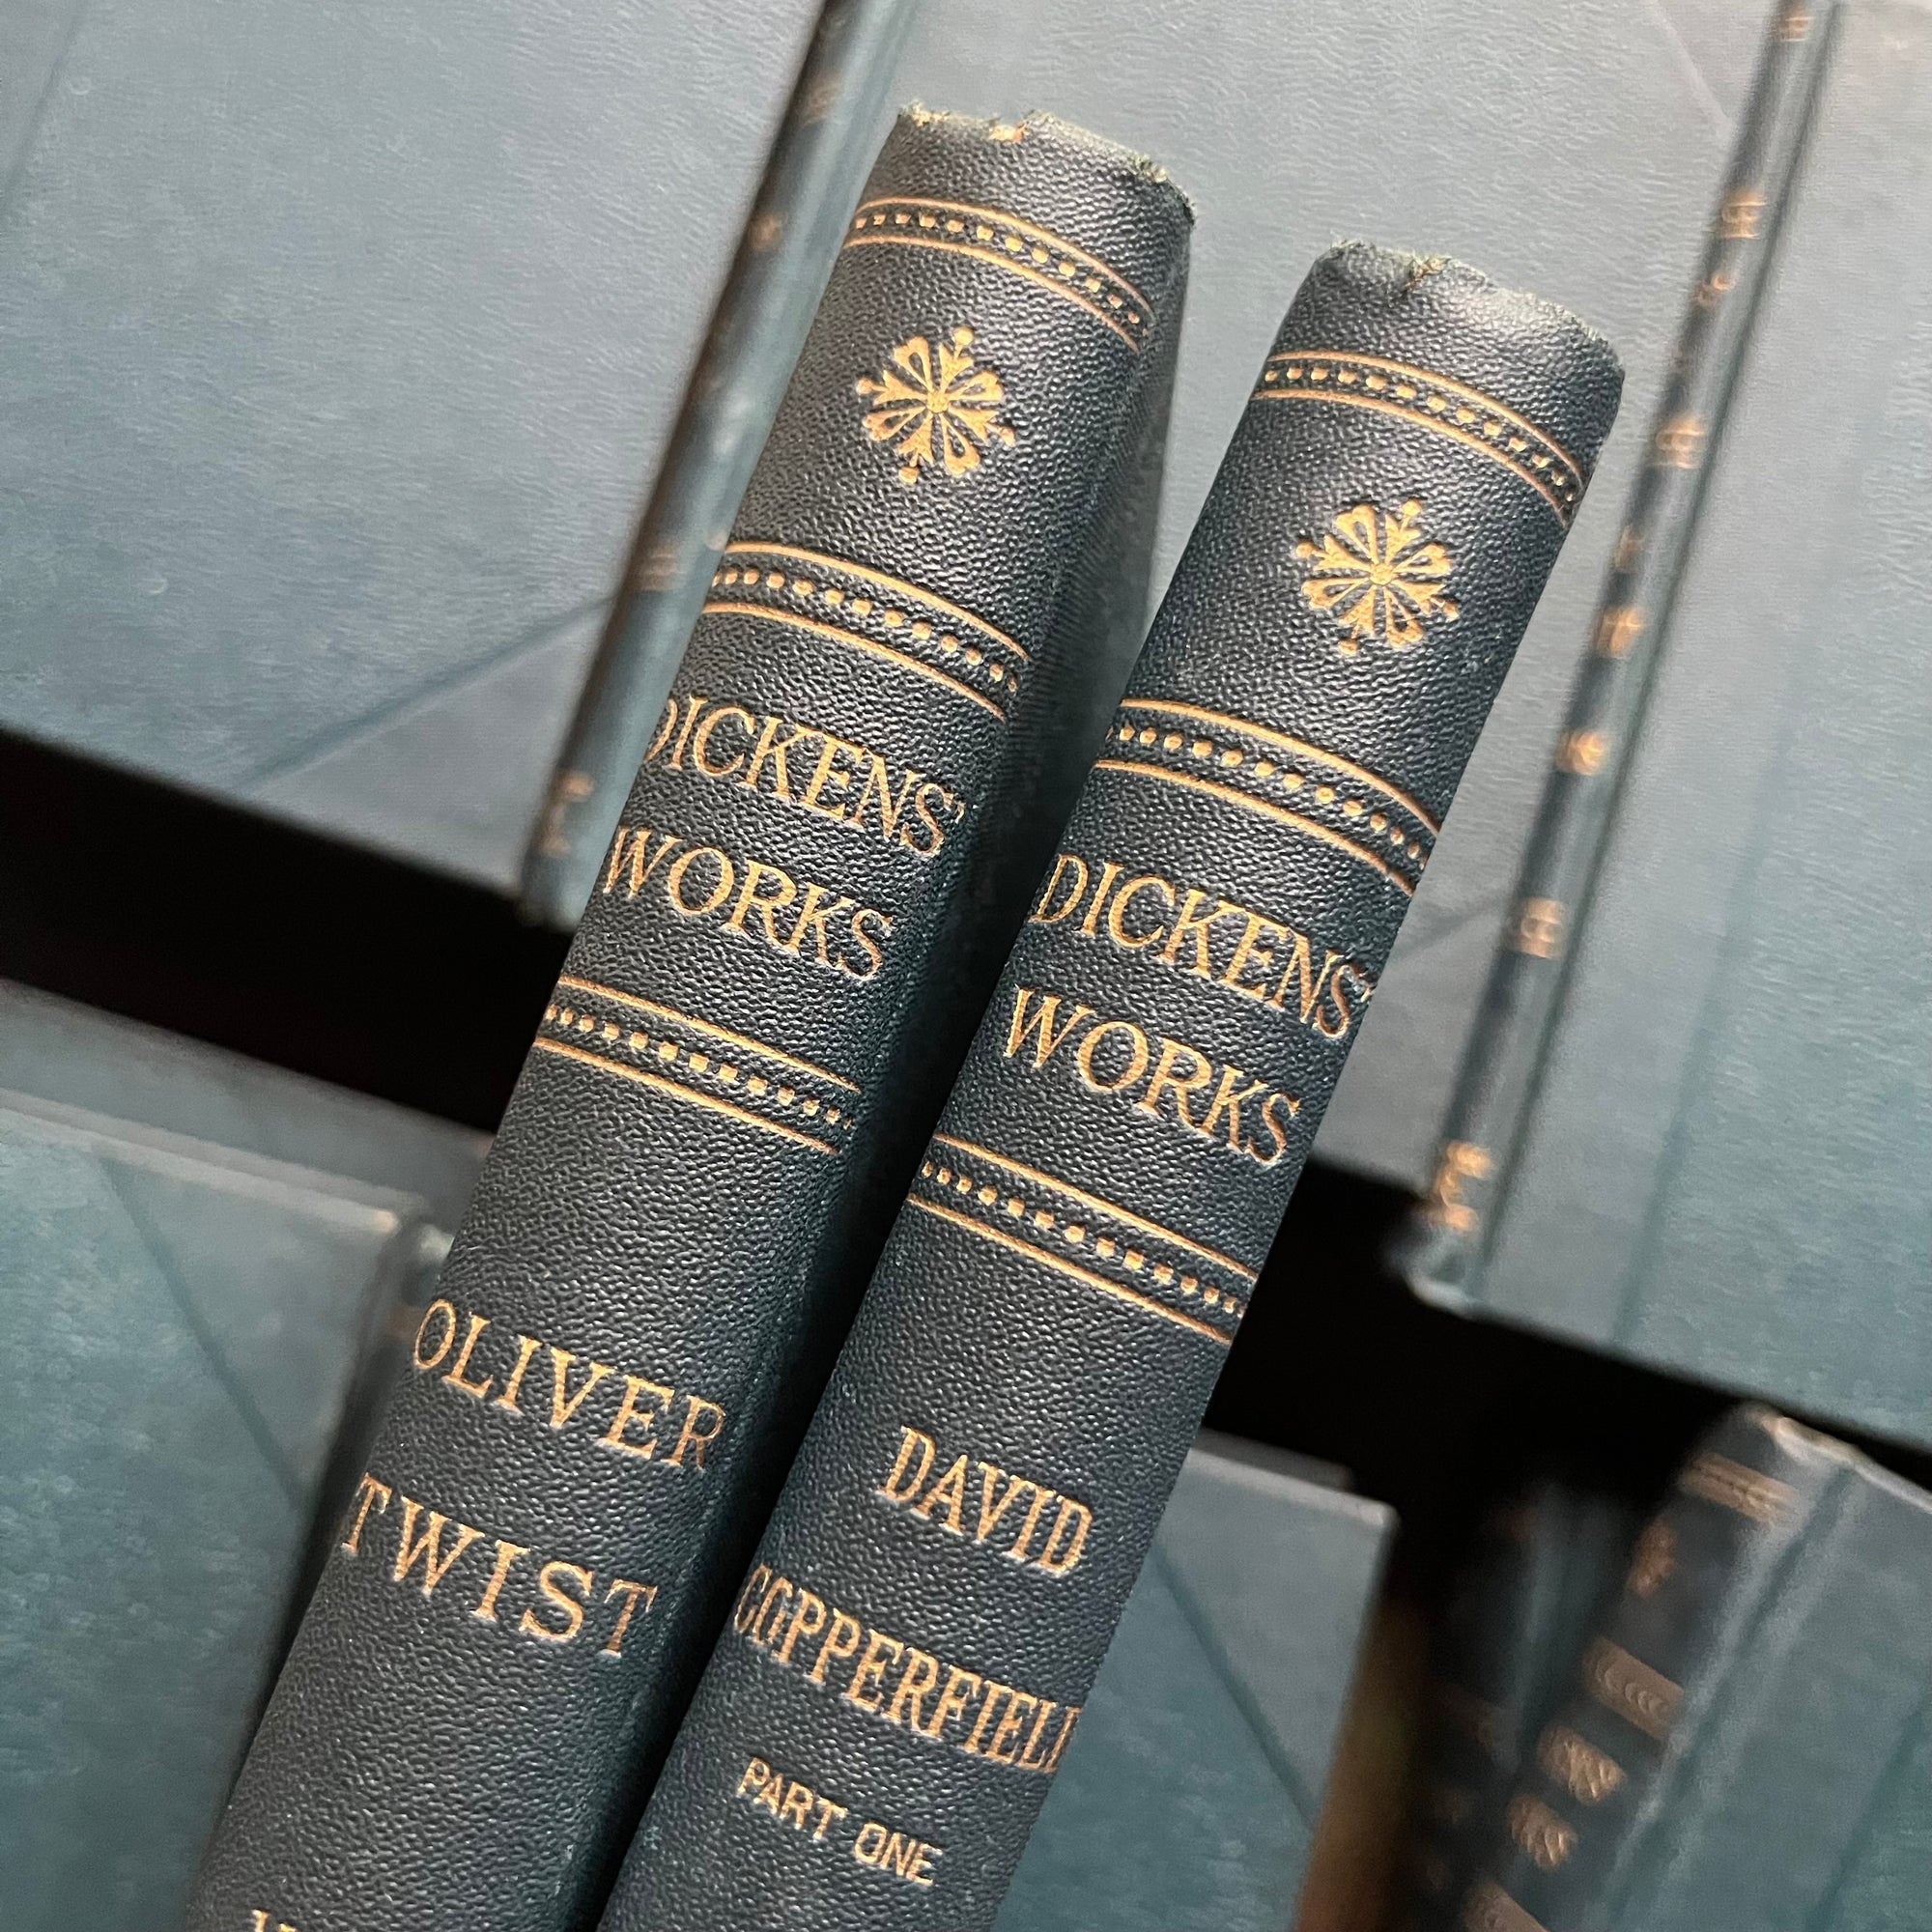 The Works of Charles Dickens - 20 Volume Set published by P. F. Collier Undated Editions-antique book set-view of the spines of Oliver Twist and David Copperfield